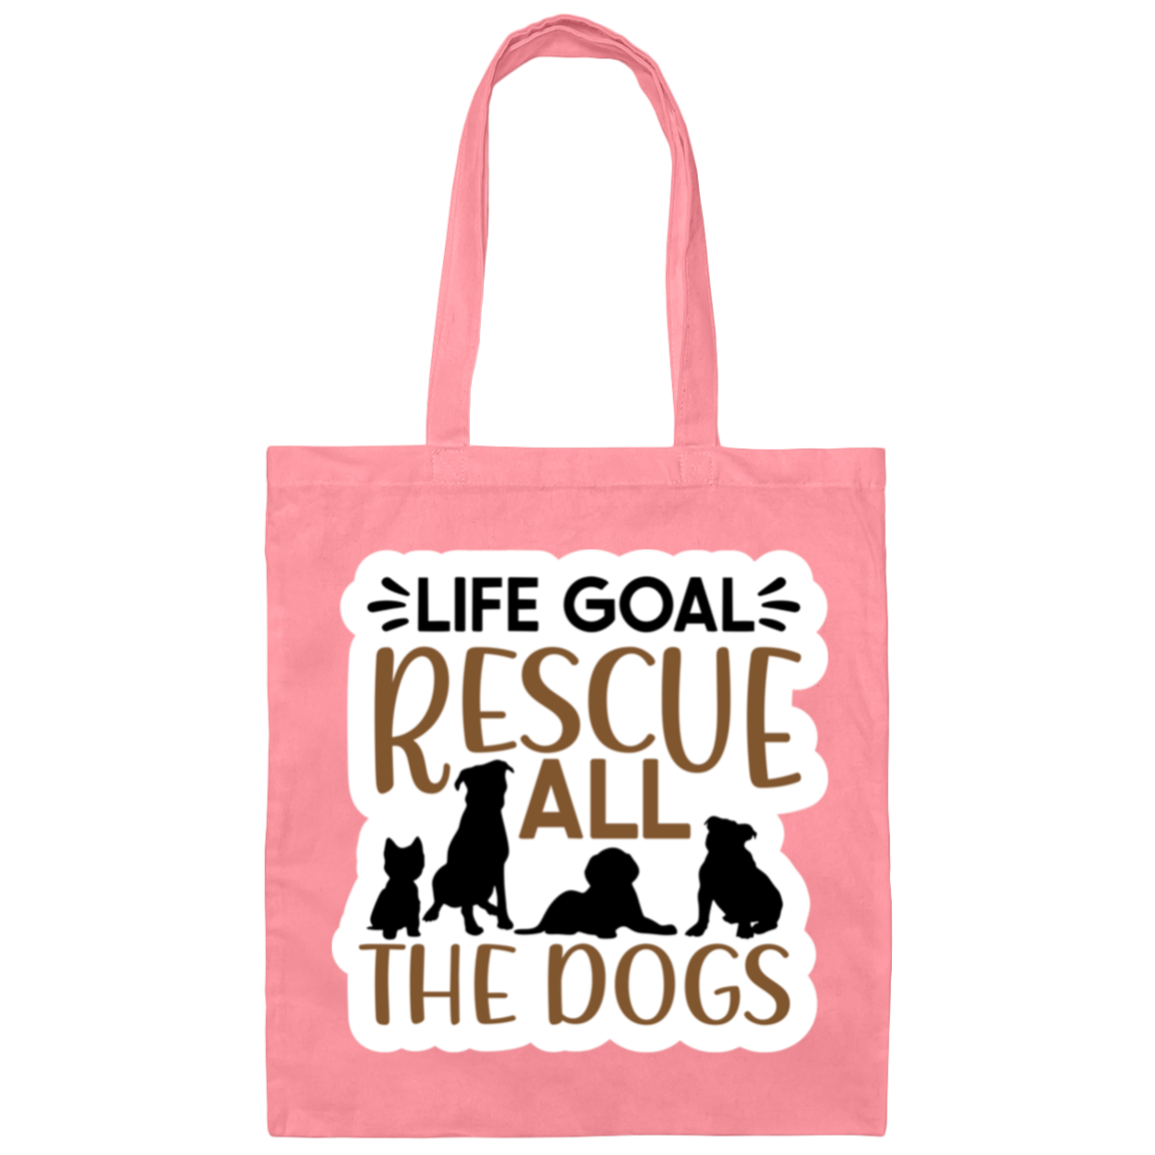 Life Goal Rescue All the Dogs Canvas Tote Bag